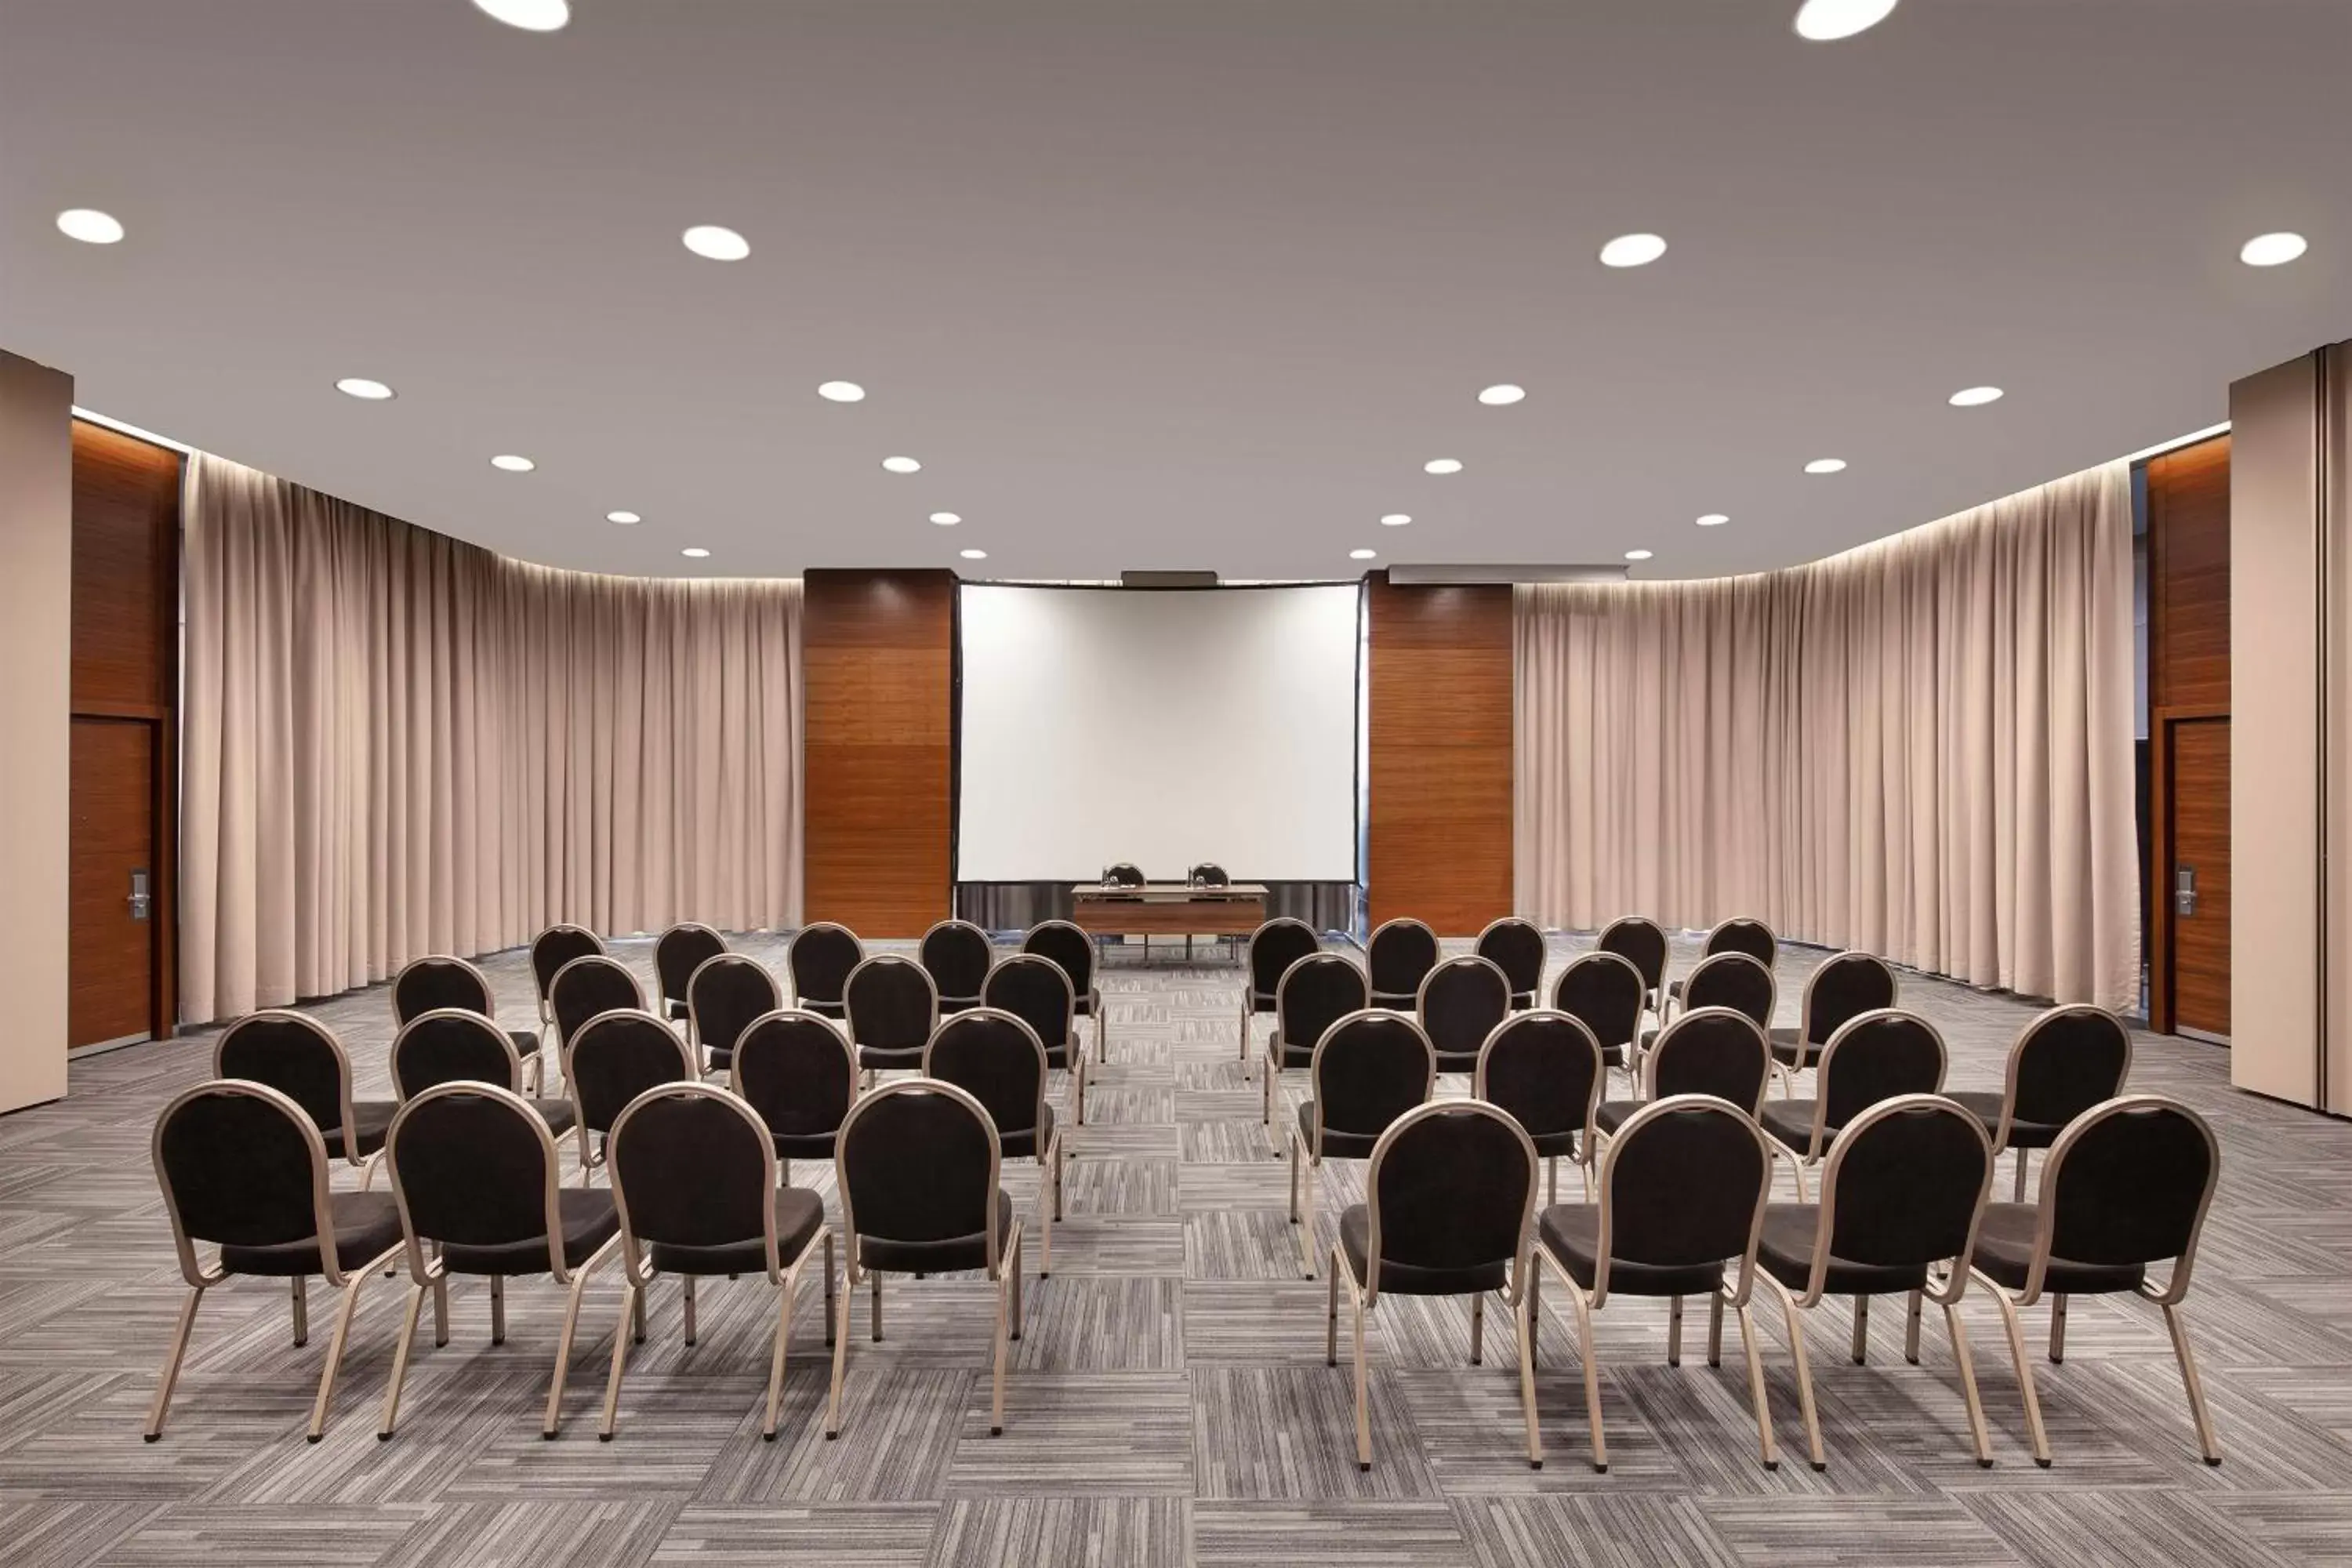 Meeting/conference room in Sheraton Istanbul Atakoy Hotel